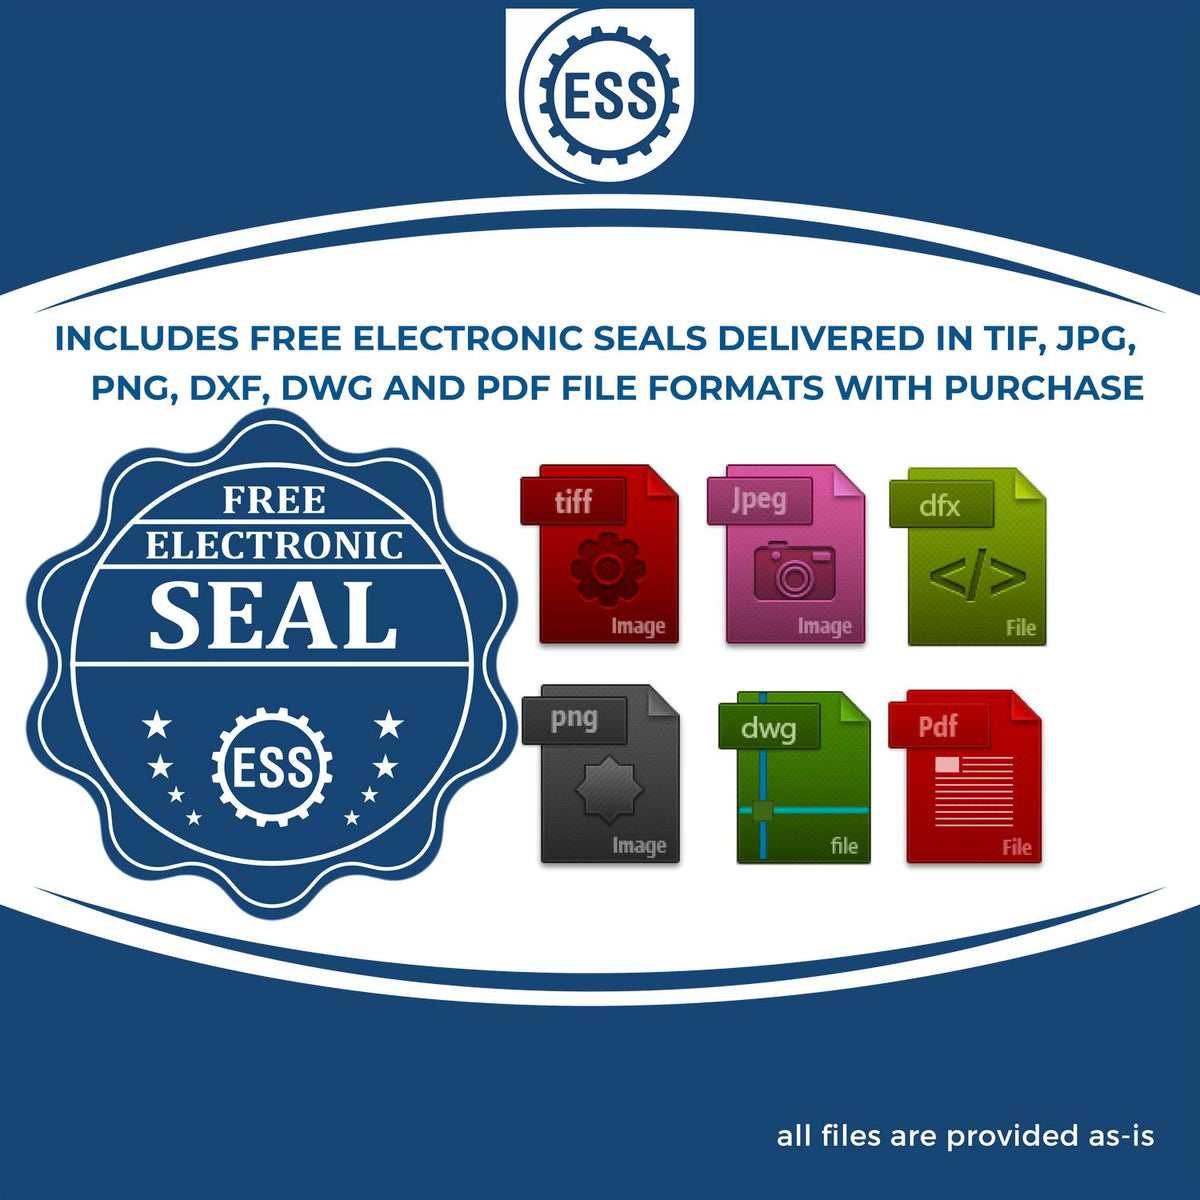 An infographic for the free electronic seal for the Hybrid Colorado Geologist Seal illustrating the different file type icons such as DXF, DWG, TIF, JPG and PNG.